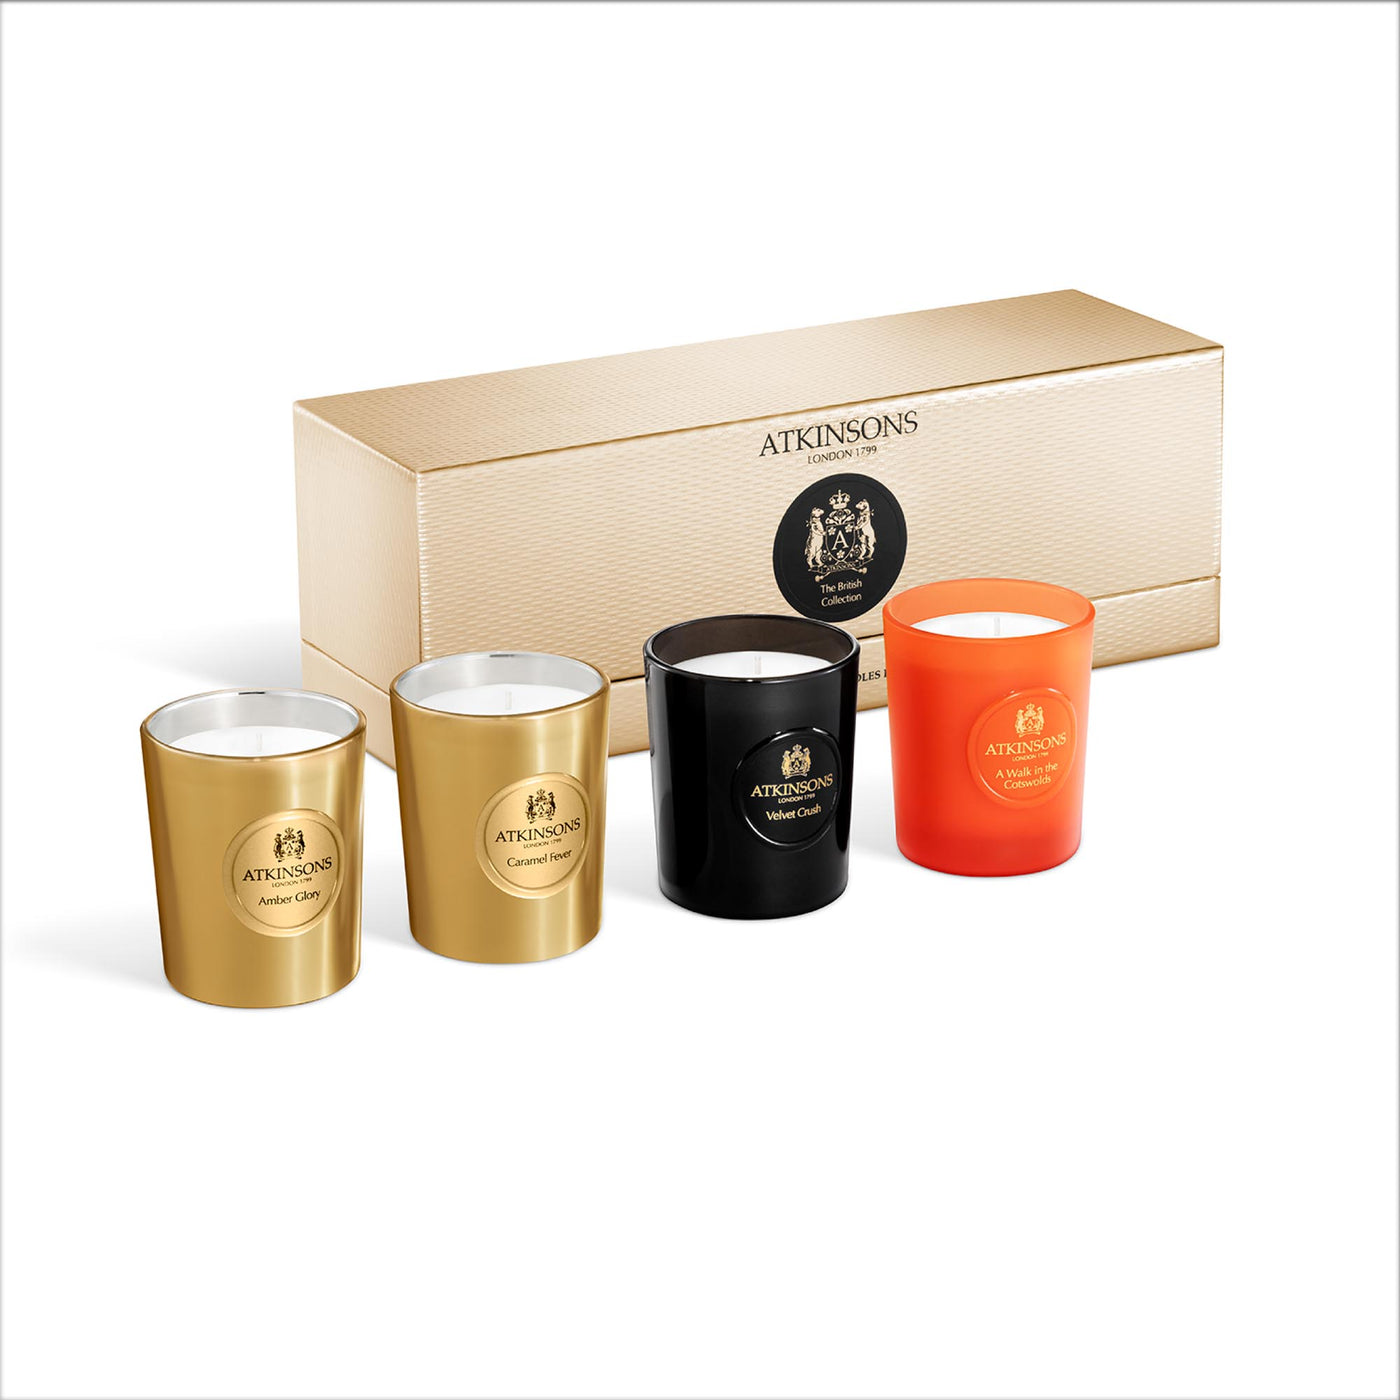 Atkinsons The British Collection Candle Set 4x75g